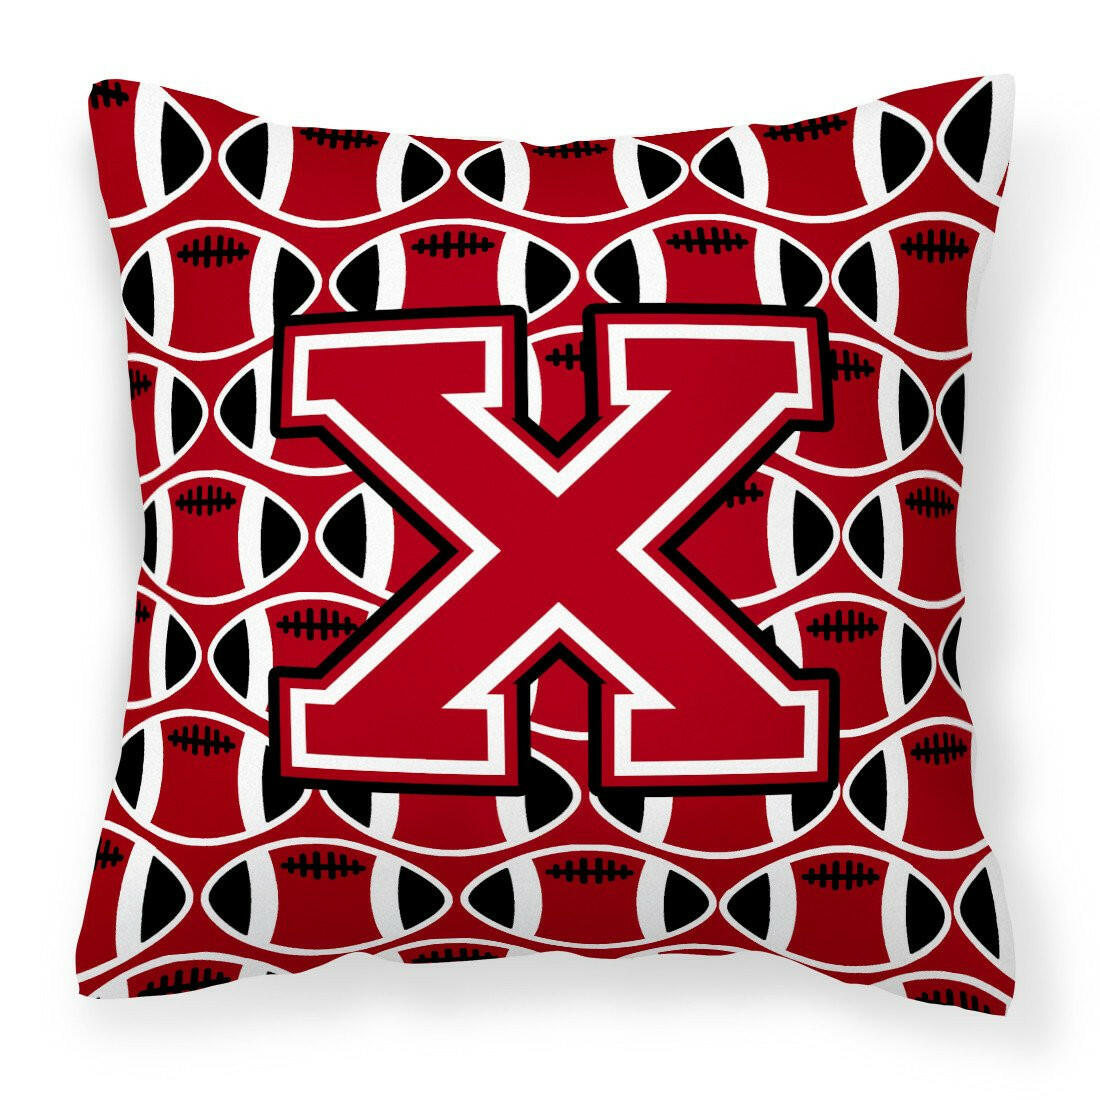 Letter X Football Red, Black and White Fabric Decorative Pillow CJ1073-XPW1414 by Caroline's Treasures